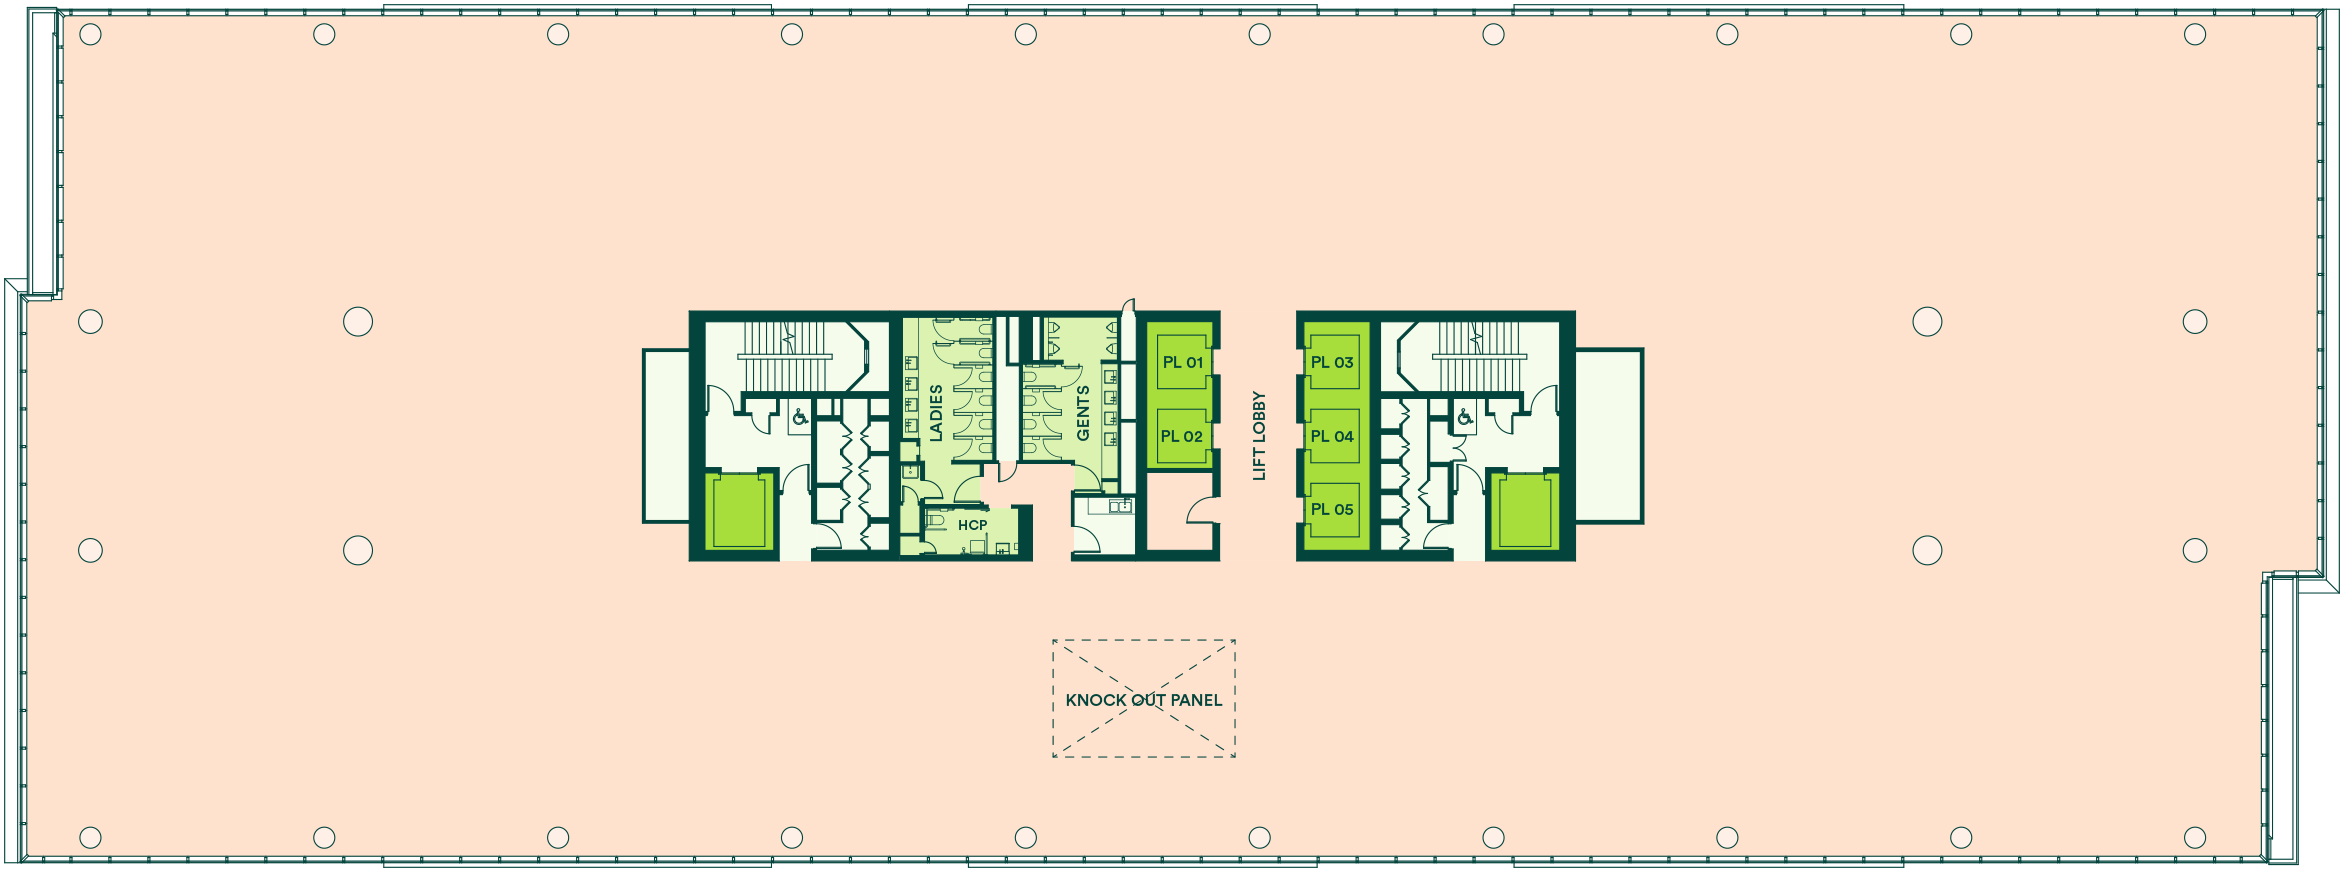 ST_R1_Office-Floor-Plans_FA_Typical-Floor-Plan_RGB.png